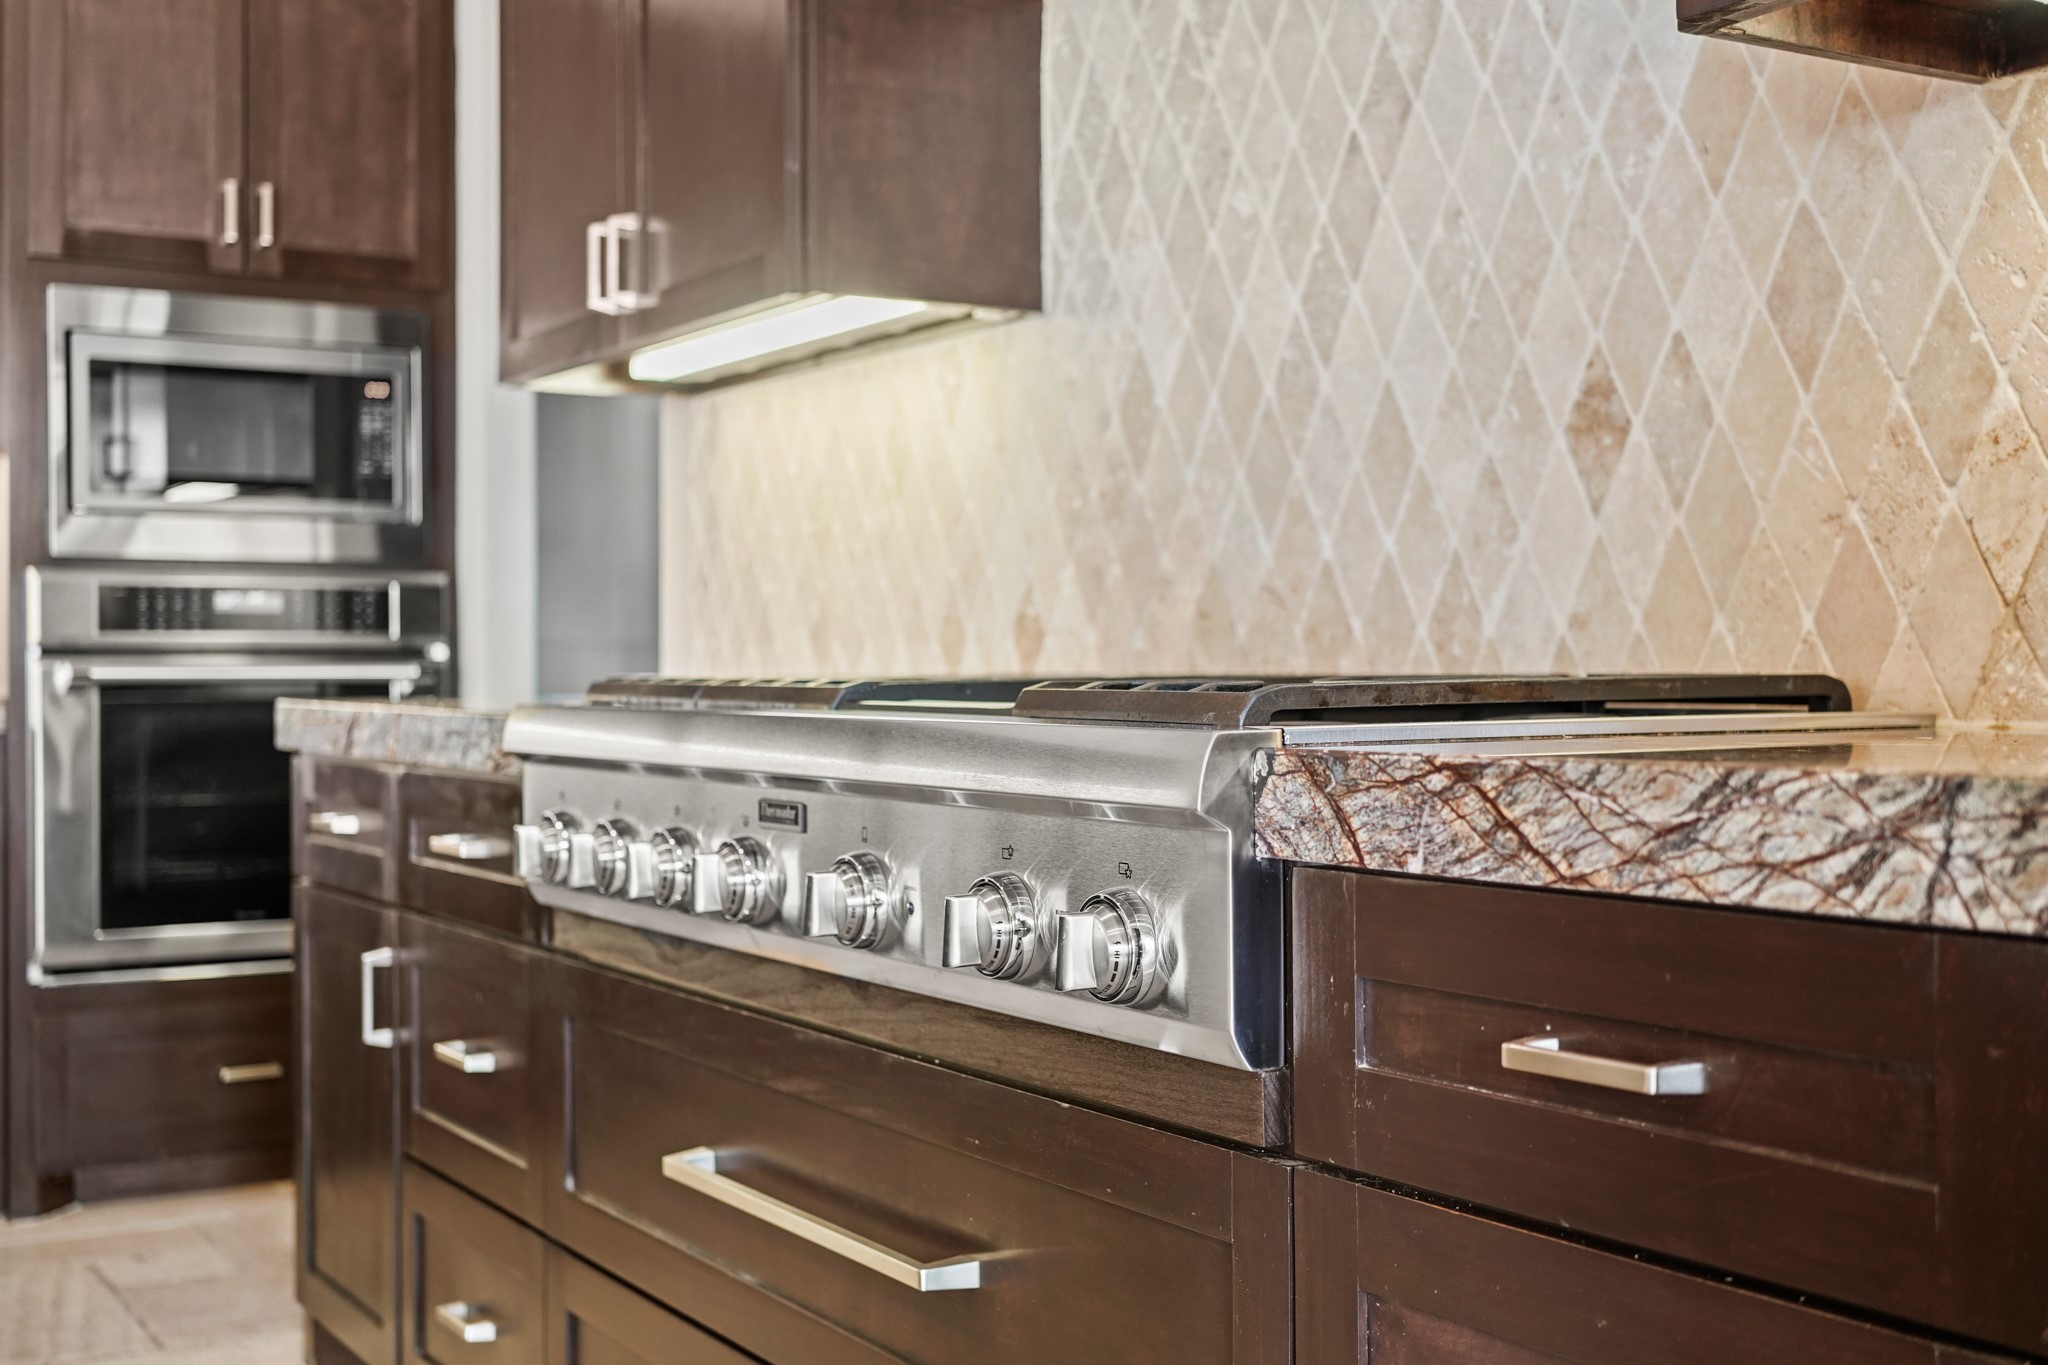 The kitchen is well appointed with Jenn-Air and Thermador appliances.